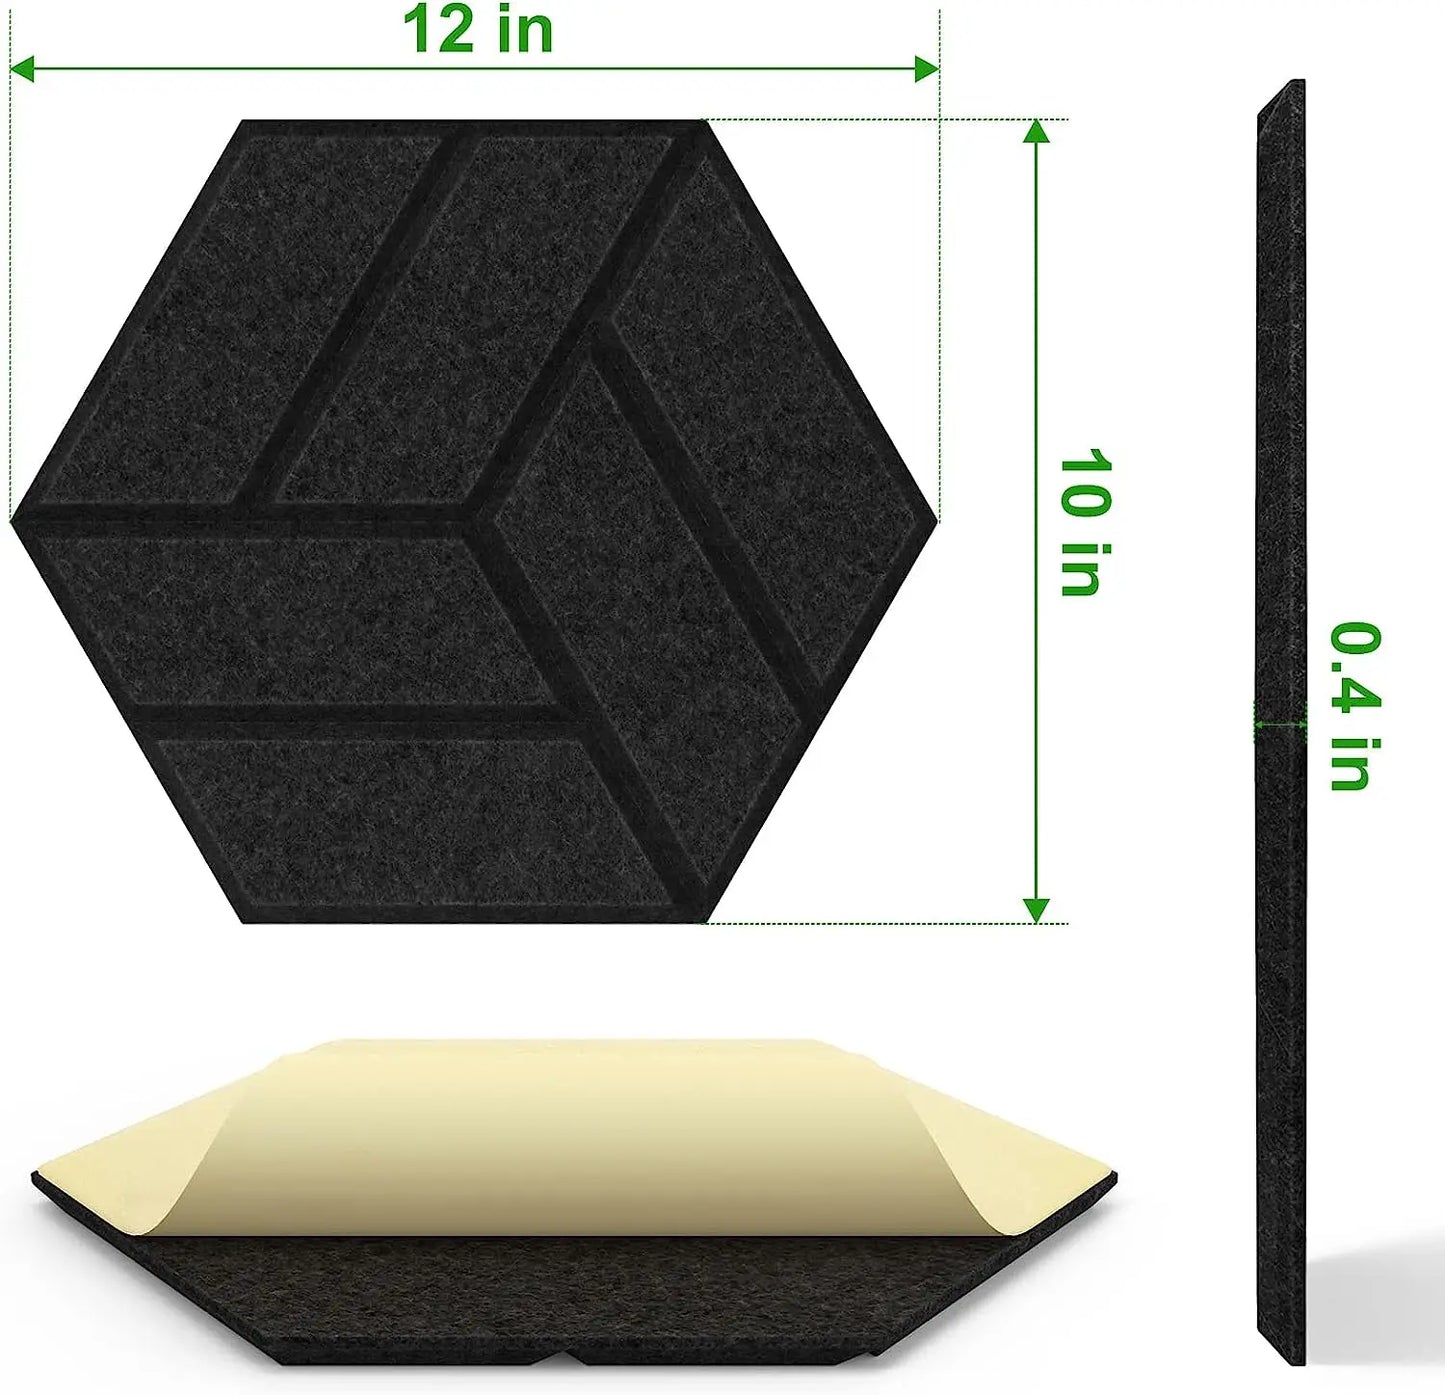 12 Pcs Self-adhesive Sound Proof Foam Panel Acoustic Panels Hexagon Design Wall Panel Sound Absorbing Soundproof  Sound Proofing